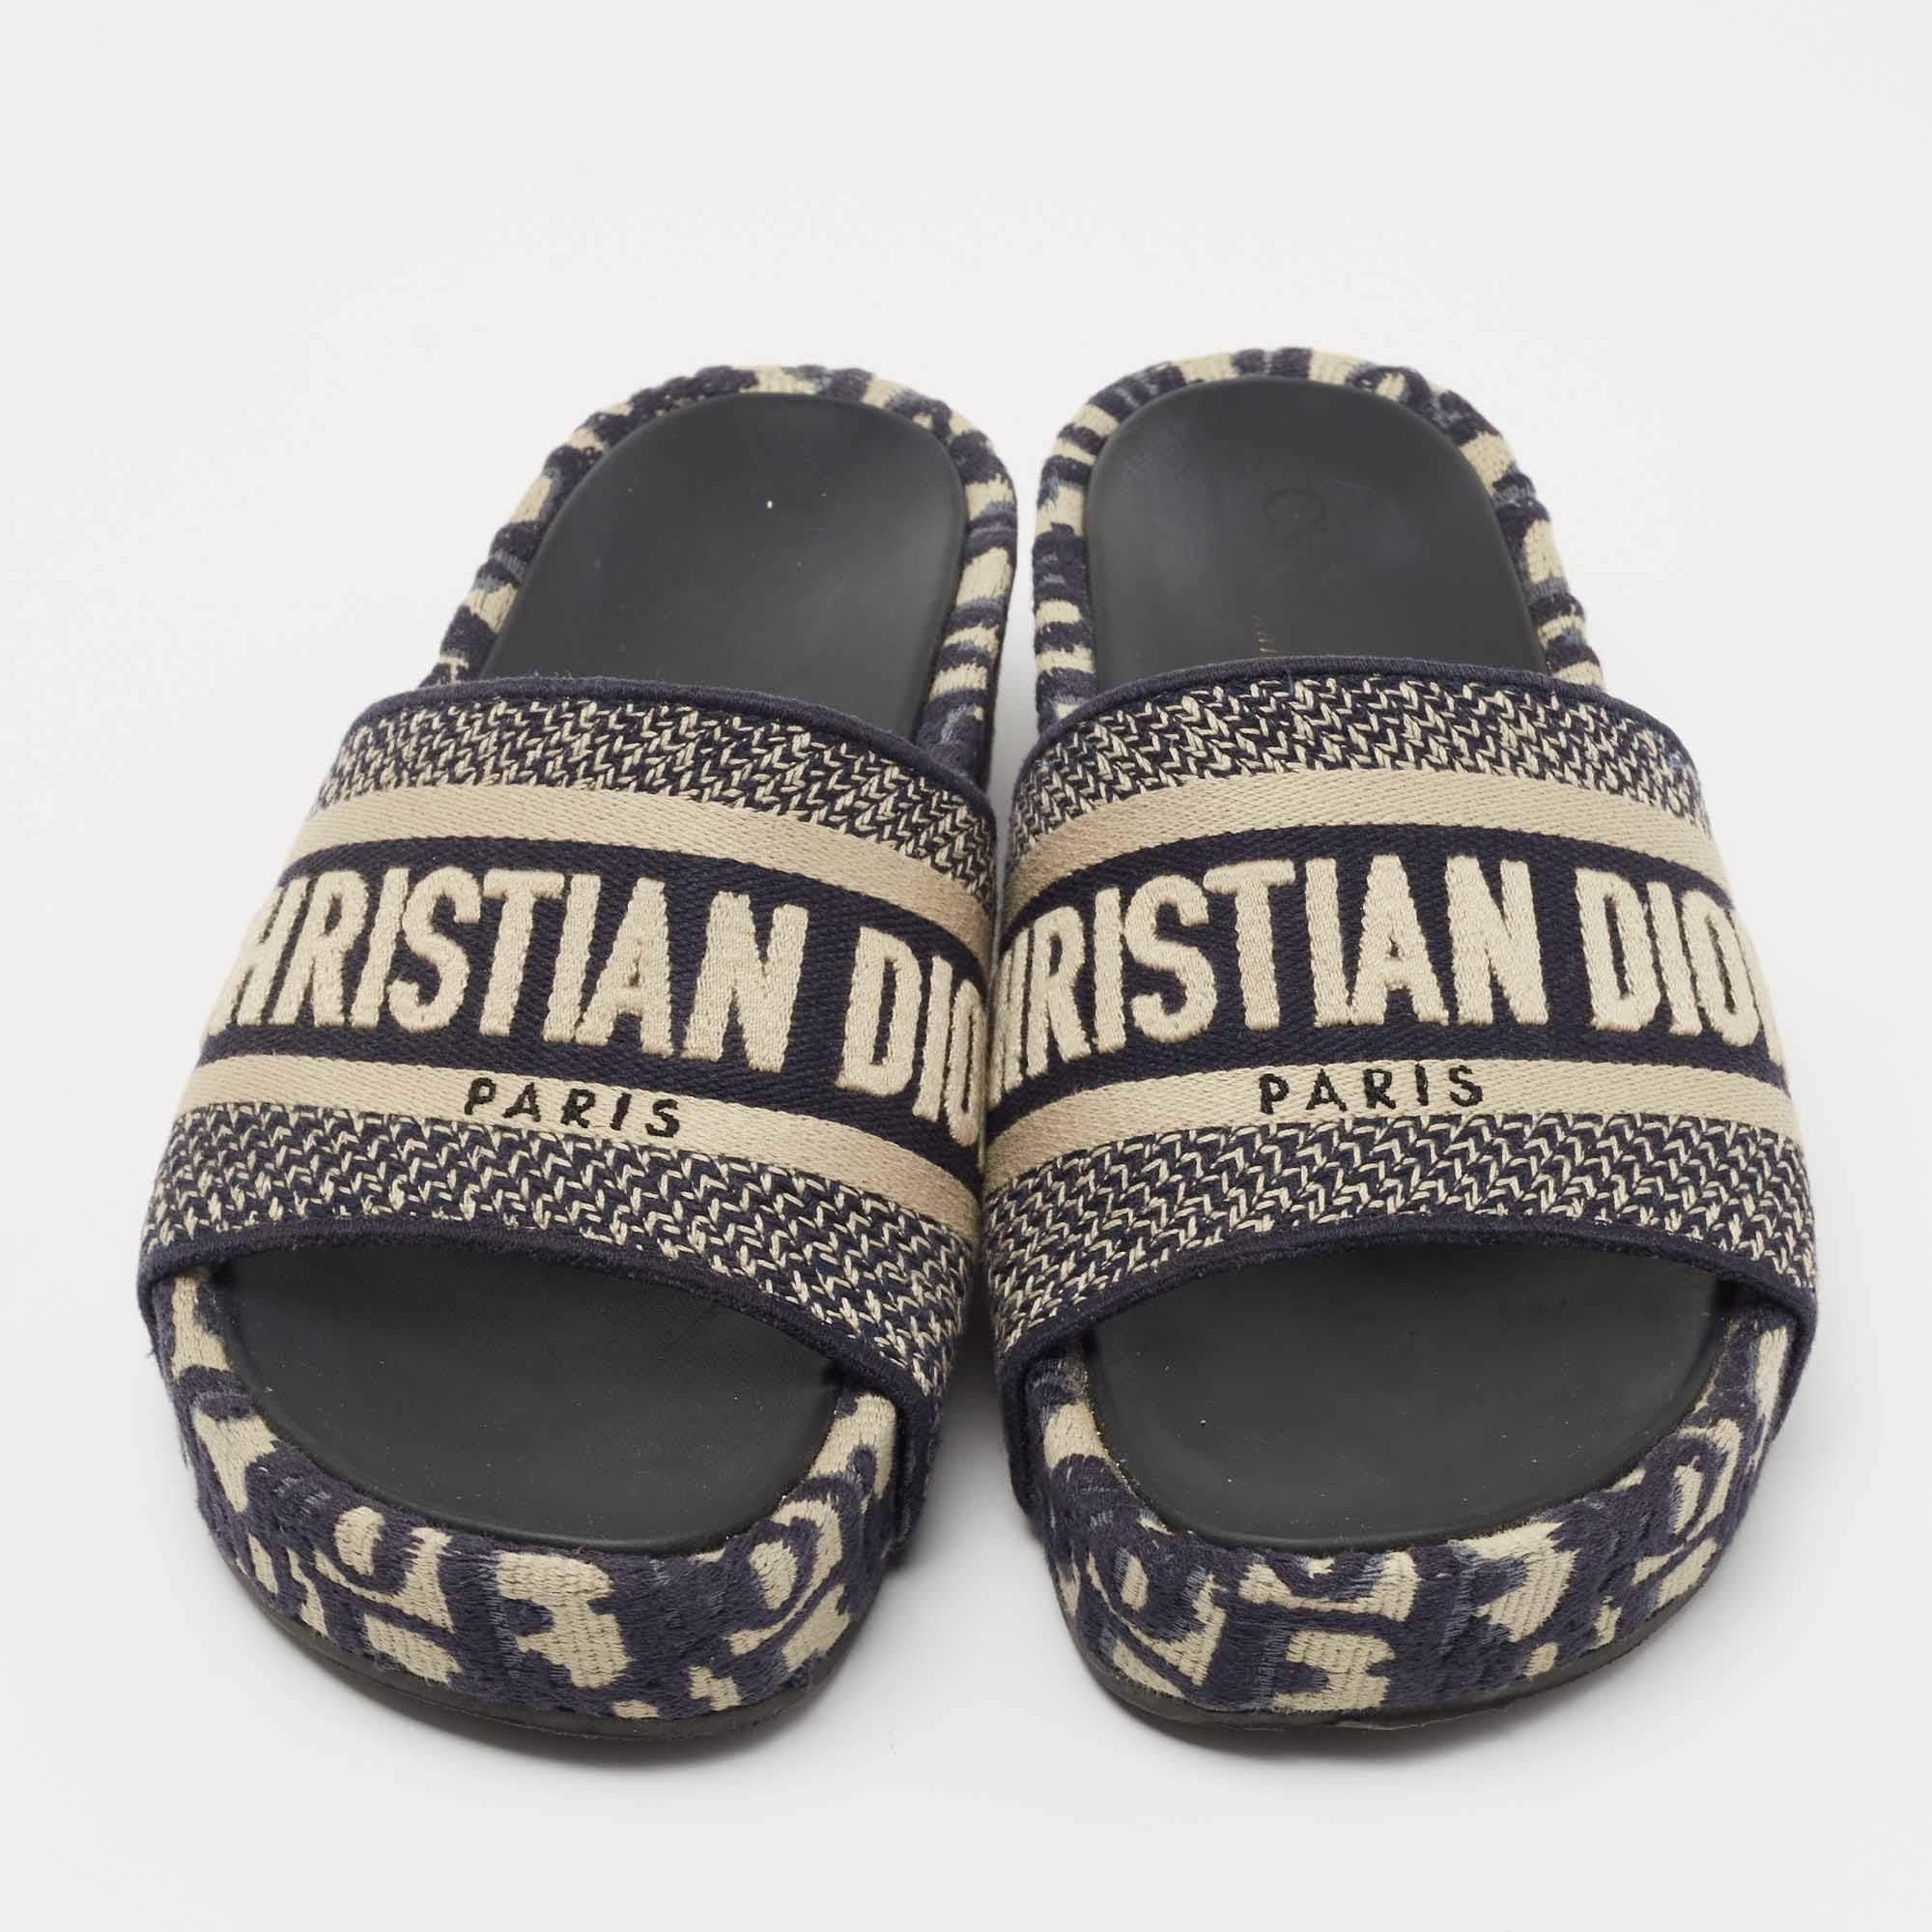 Enhance your casual looks with a touch of high style with these designer slides. Rendered in quality material with a lovely hue adorning its expanse, this pair is a must-have!

Includes
Original Dustbag, Original Box, Invoice